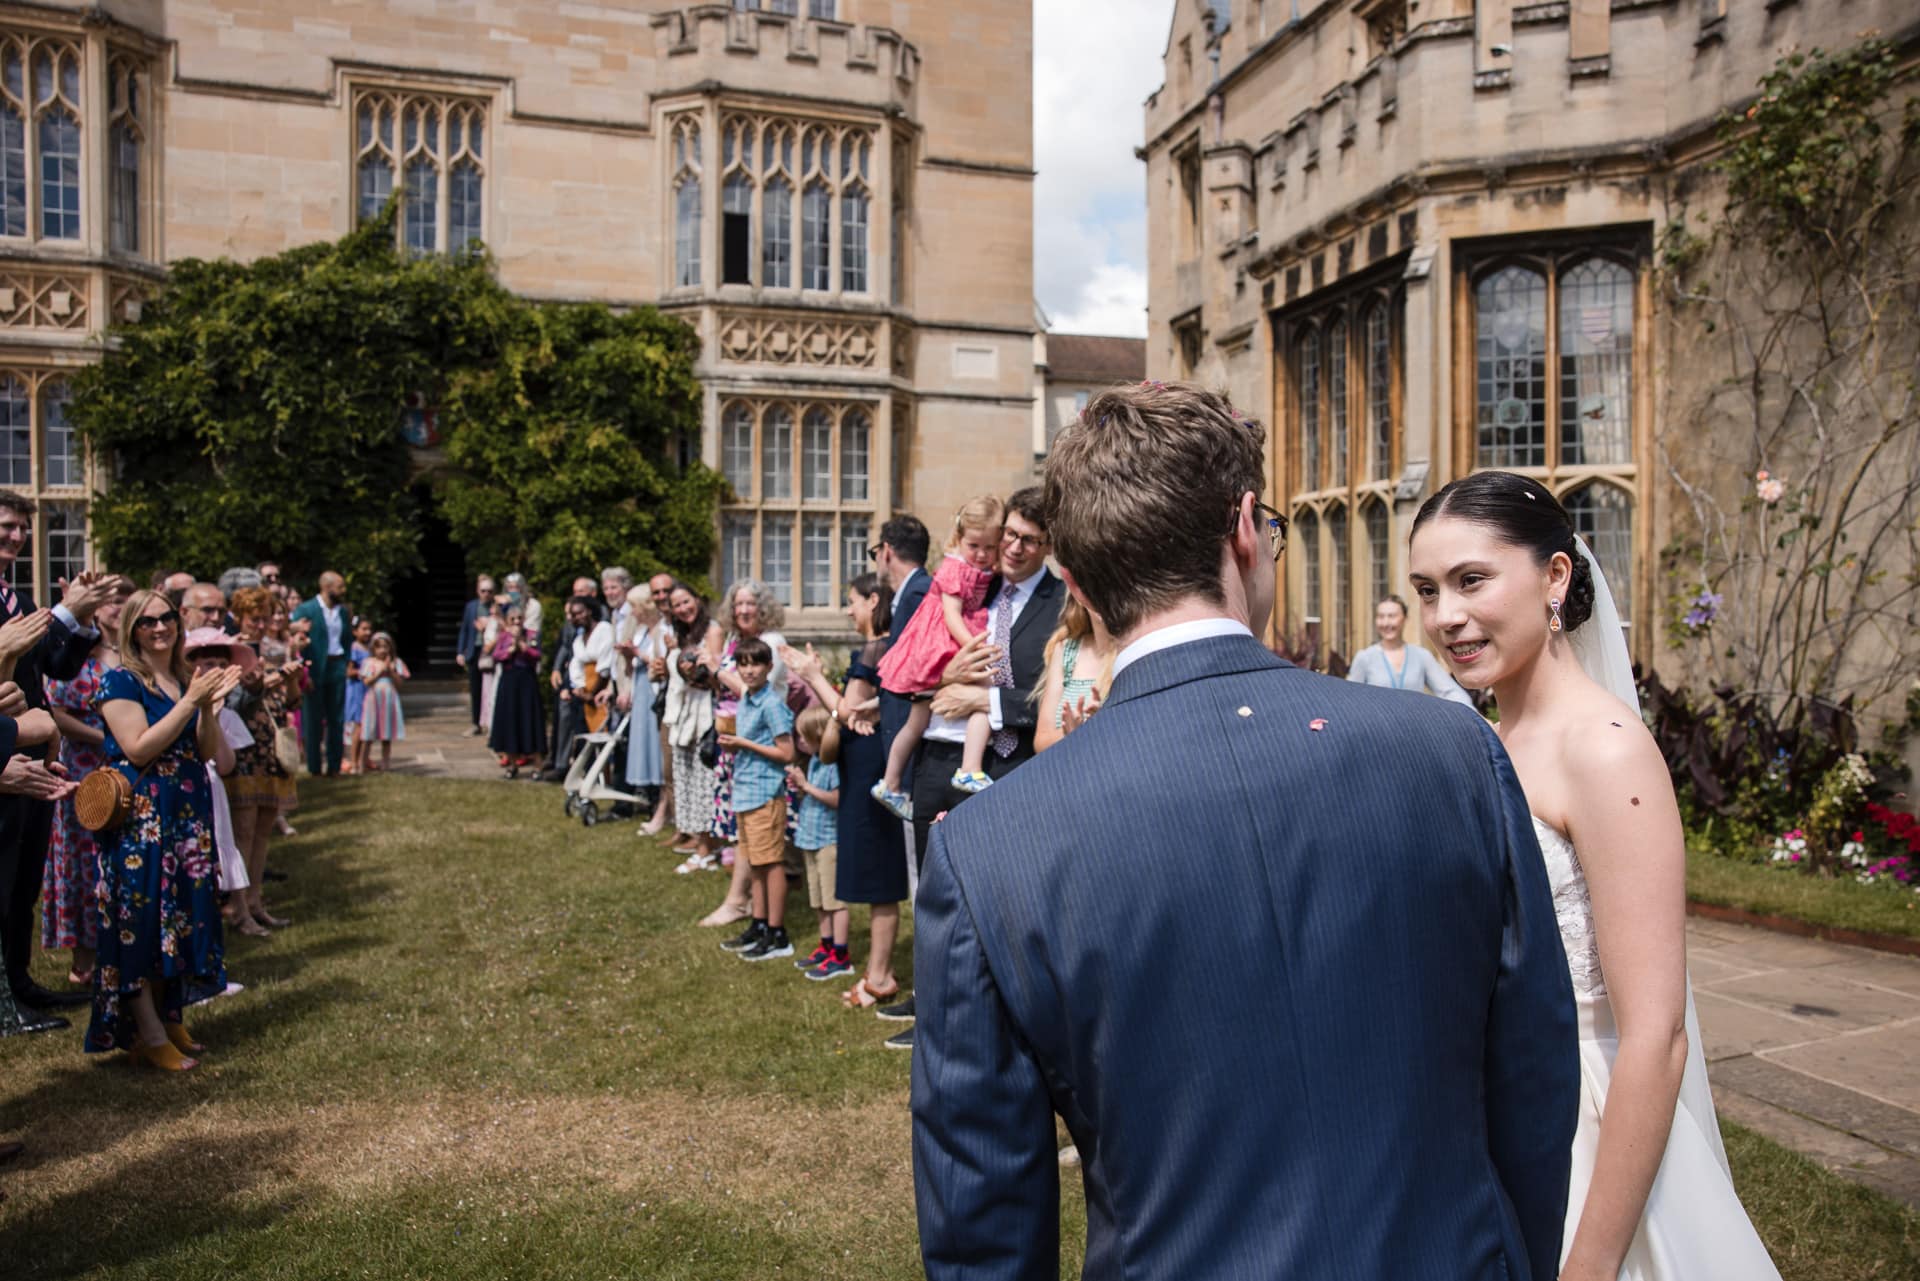 The Bride and Groom looking at each other, whilst the guests are still standing in the confetti line up, within the grounds of Pembroke House